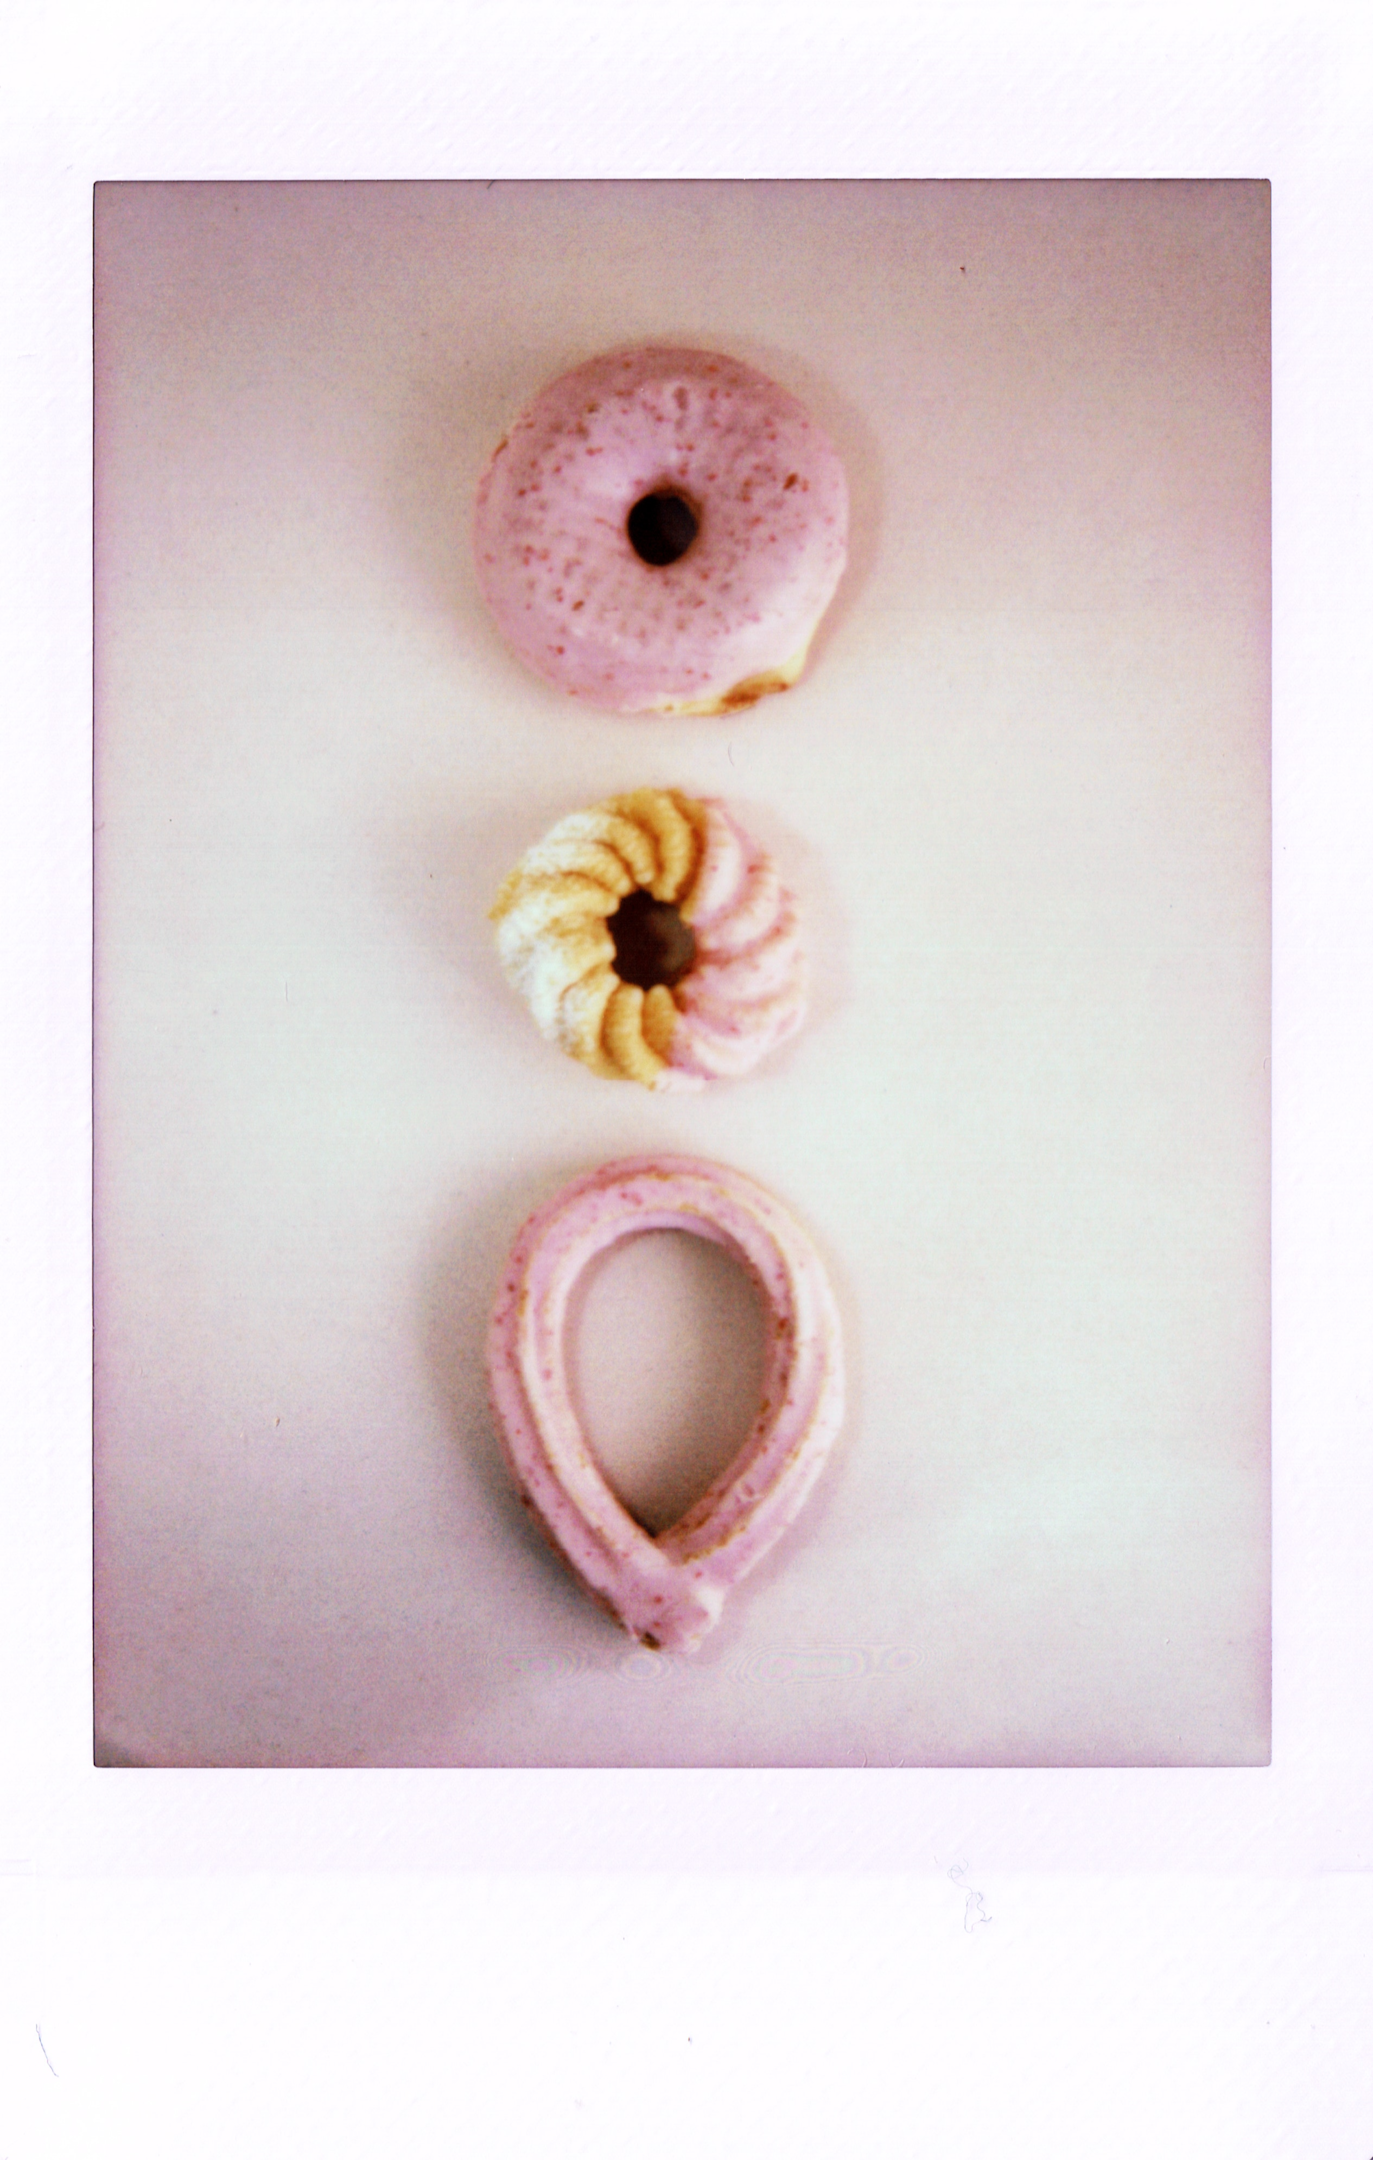 A picture of three doughnuts with pink icing, the top one is a normal ring doughnut, the middle is a french doughtnut, and the bottom is a looped chouro. 